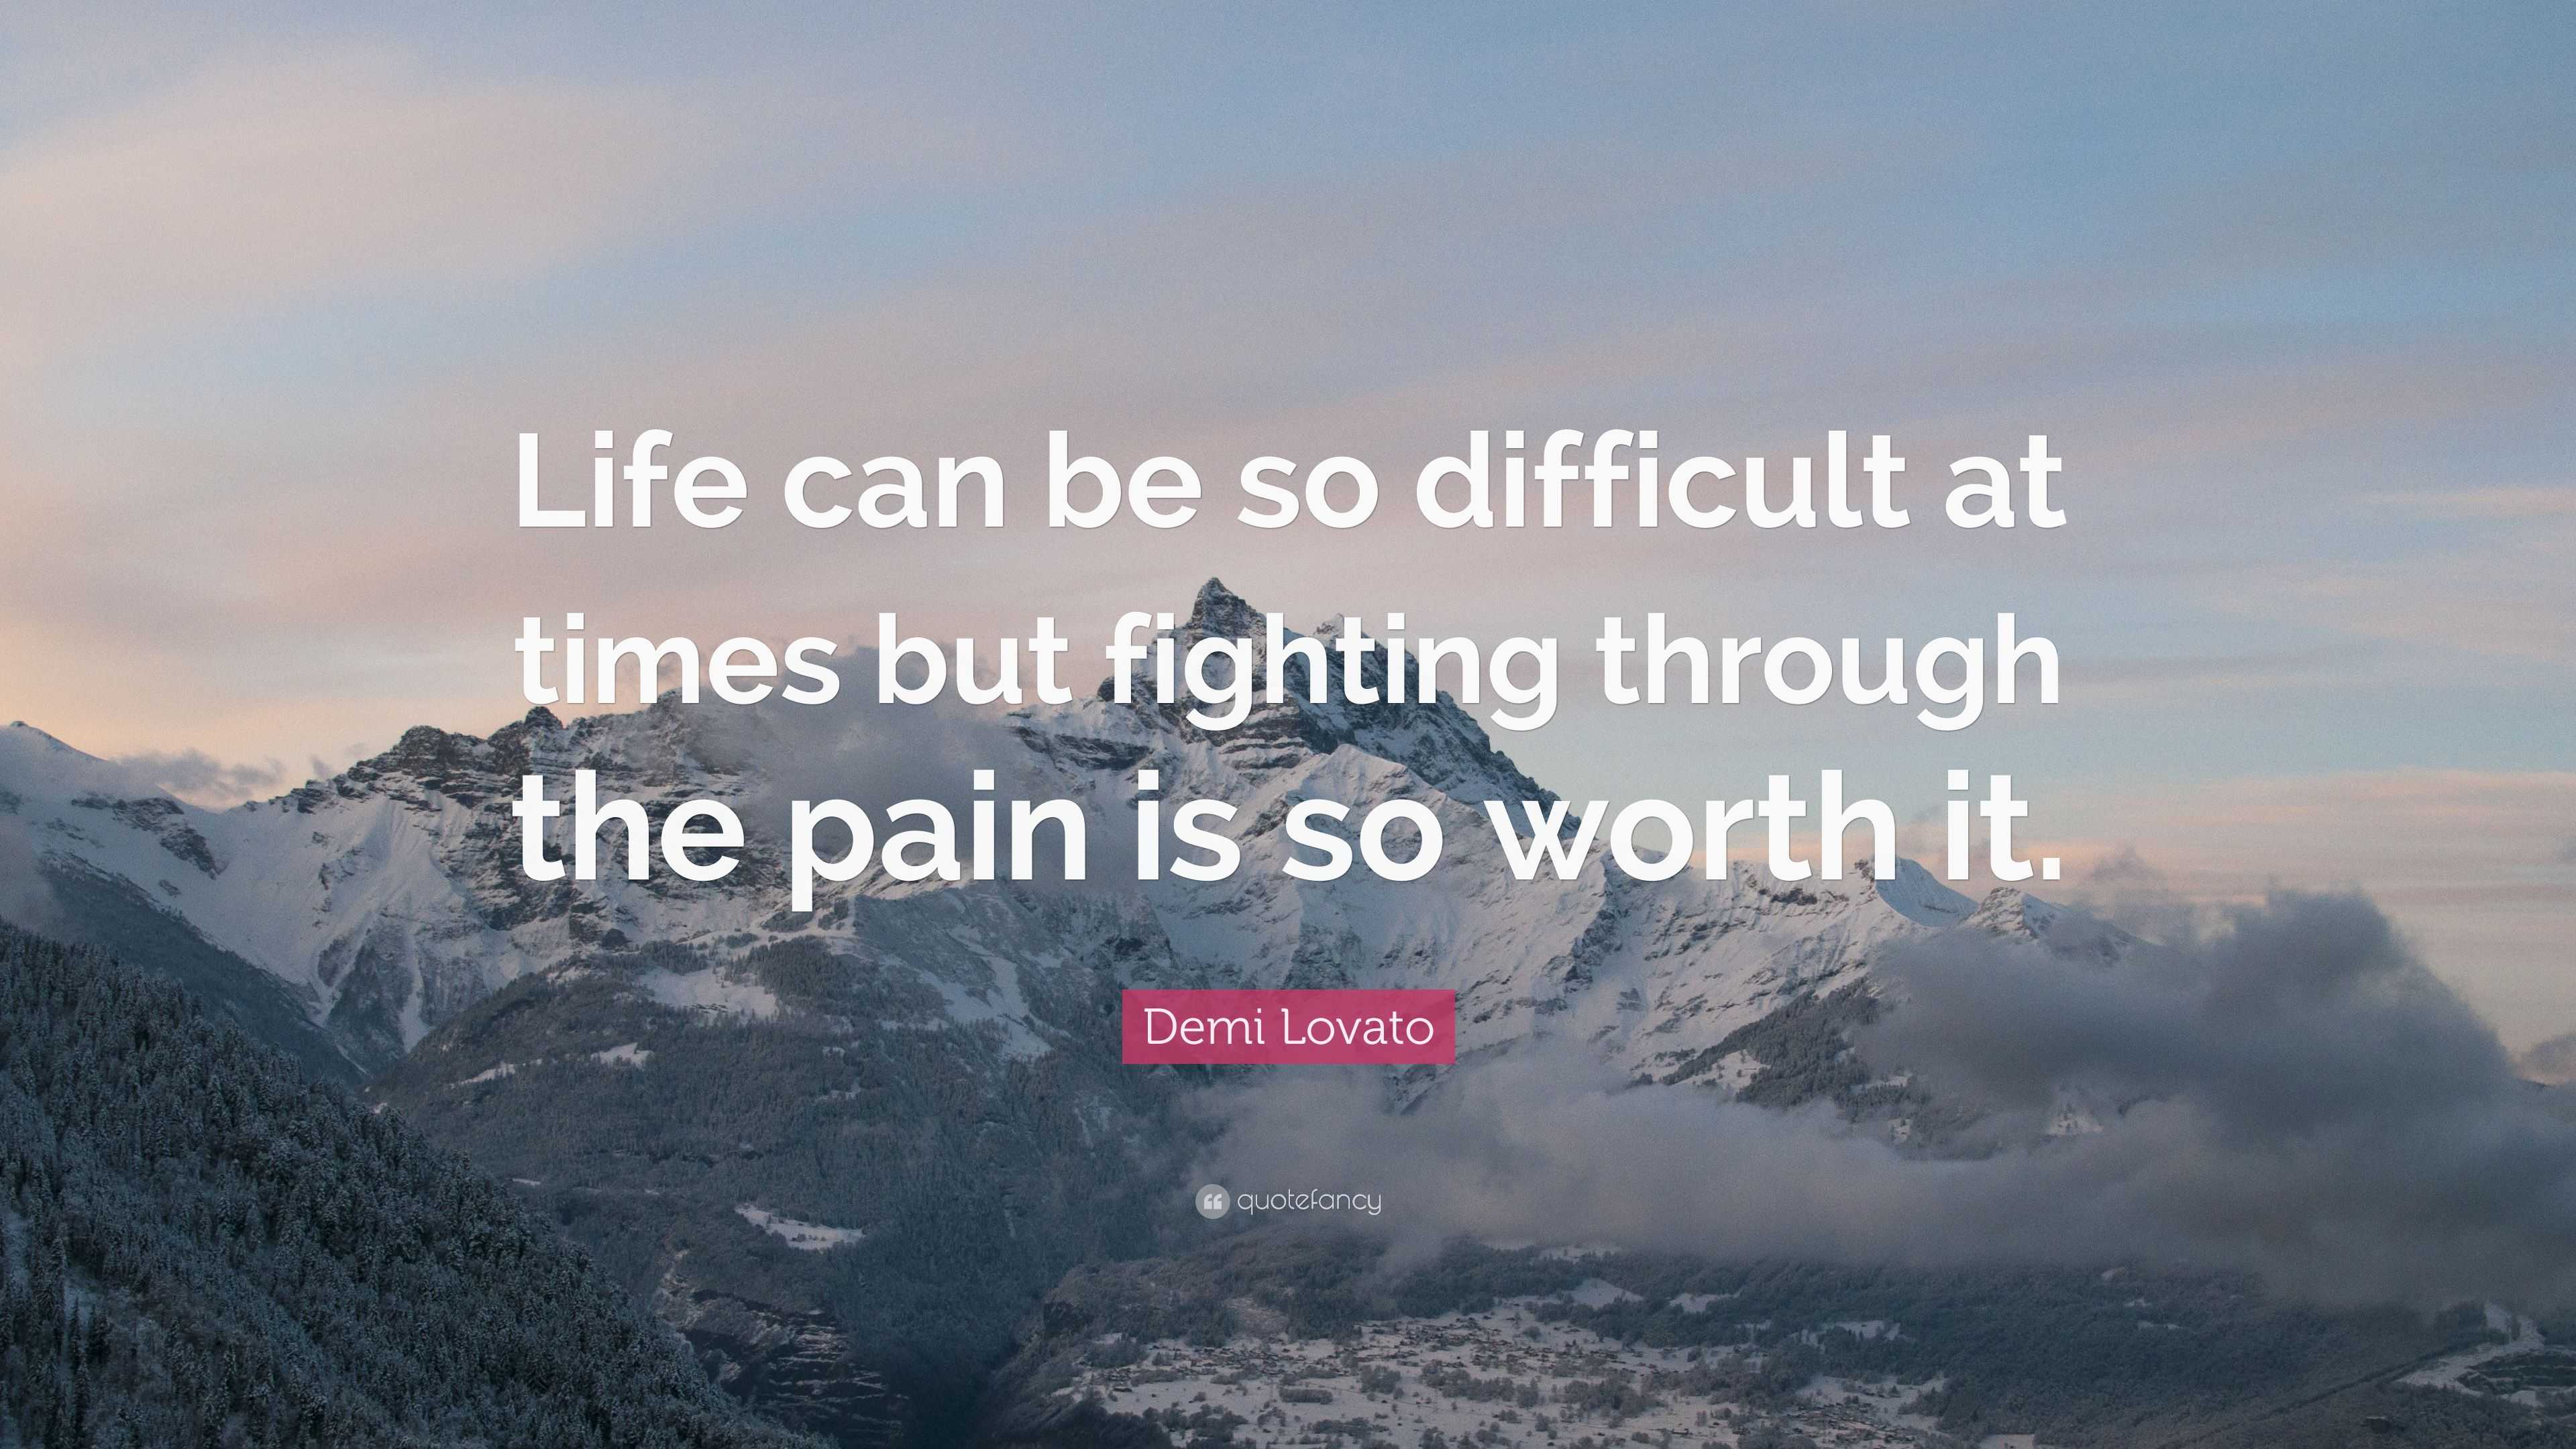 Demi Lovato Quote “Life can be so difficult at times but